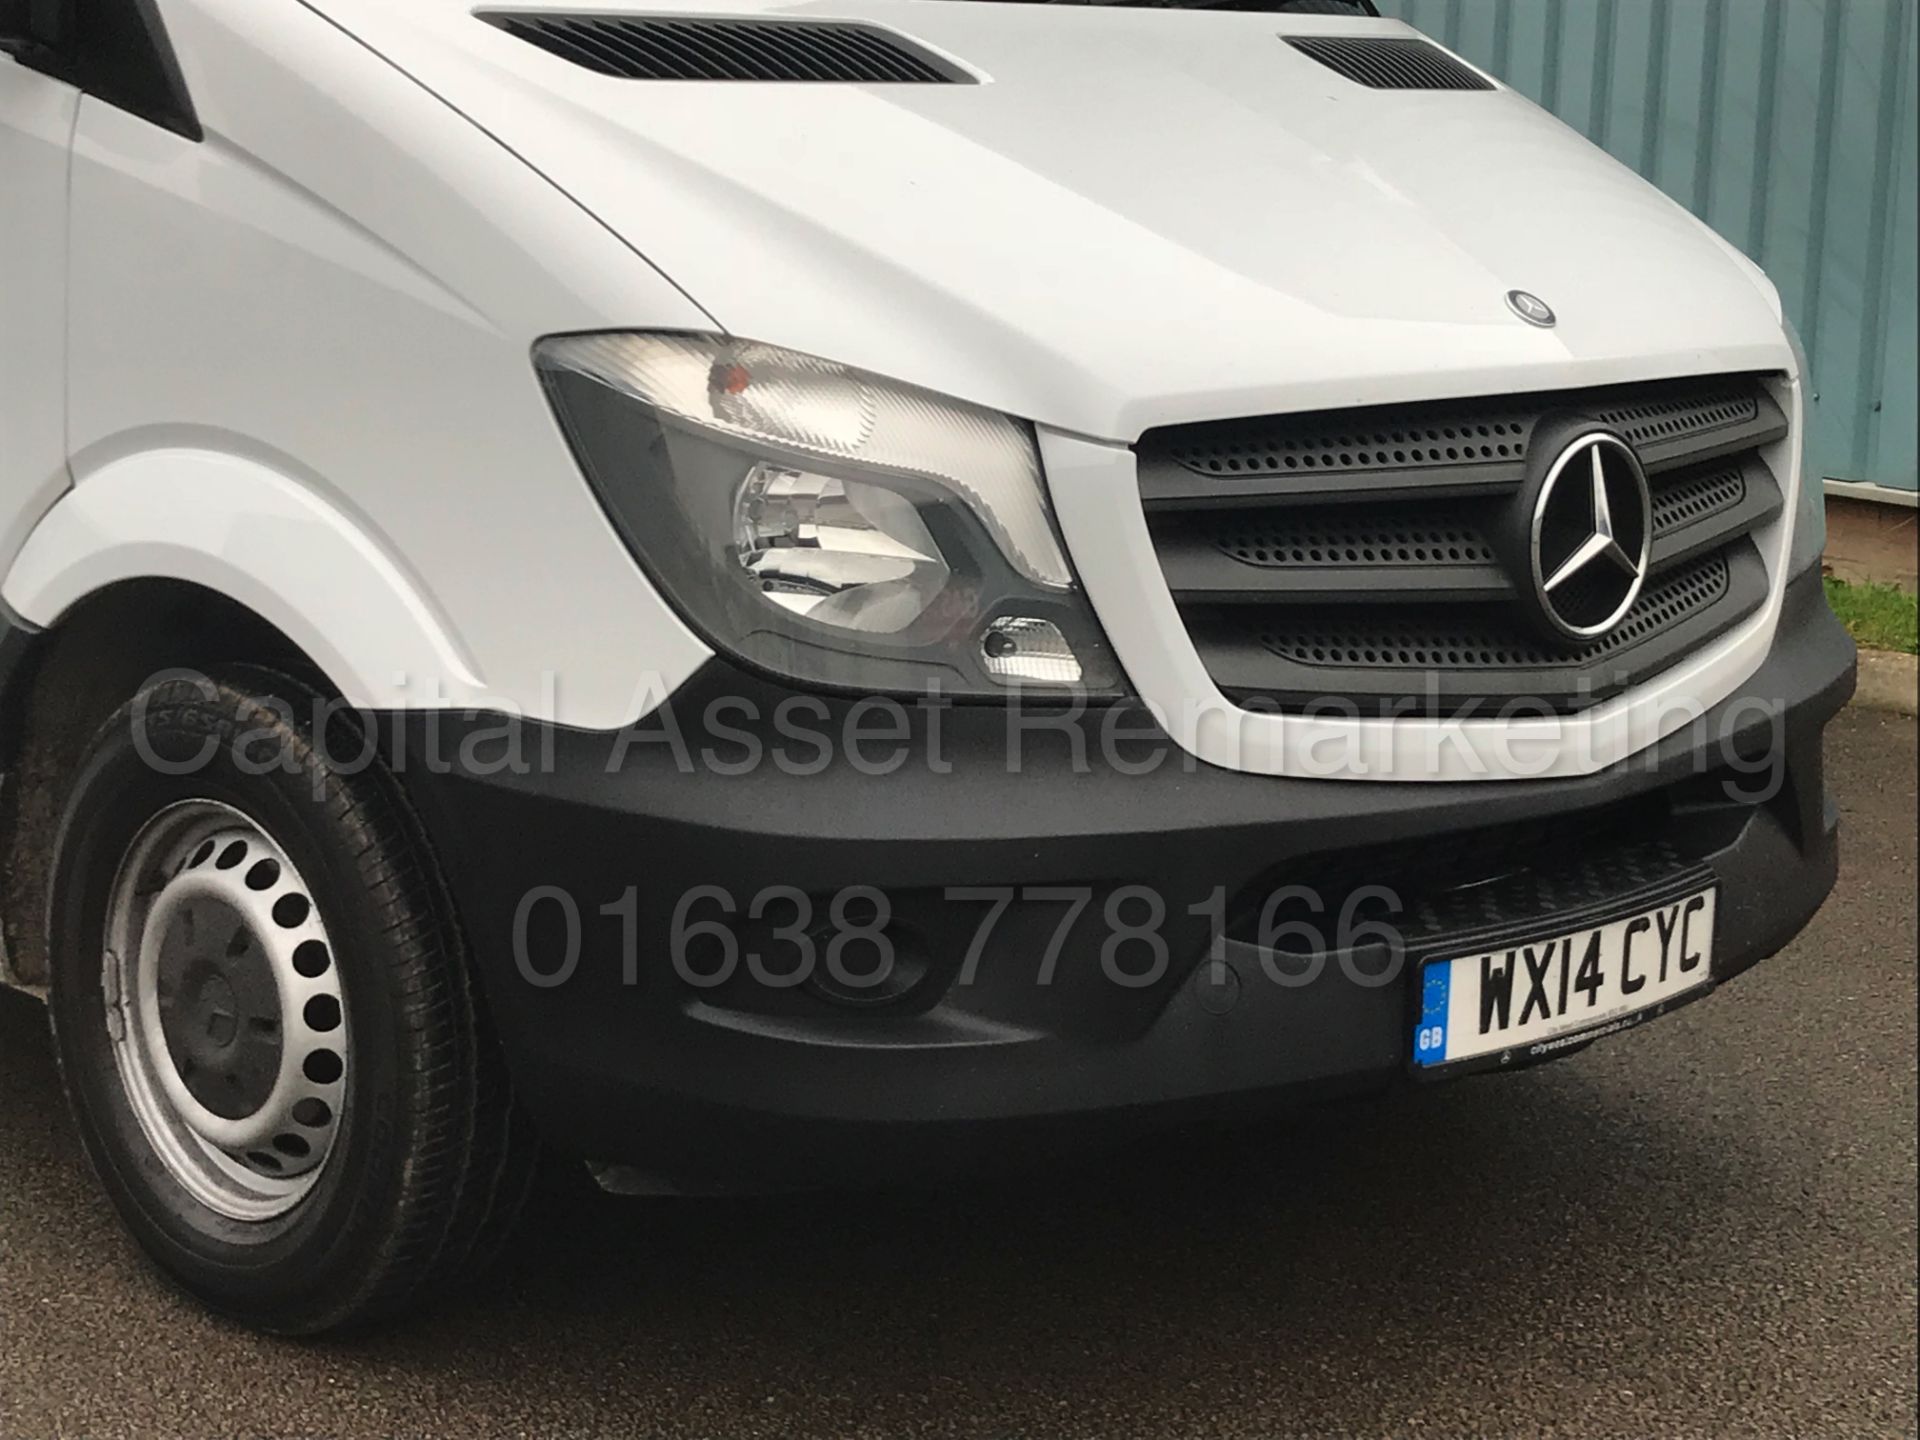 (ON SALE) MERCEDES-BENZ SPRINTER 313 CDI 'LWB - TIPPER' (2014 FACELIFT) '130 BHP -6 SPEED' *1 OWNER* - Image 11 of 24